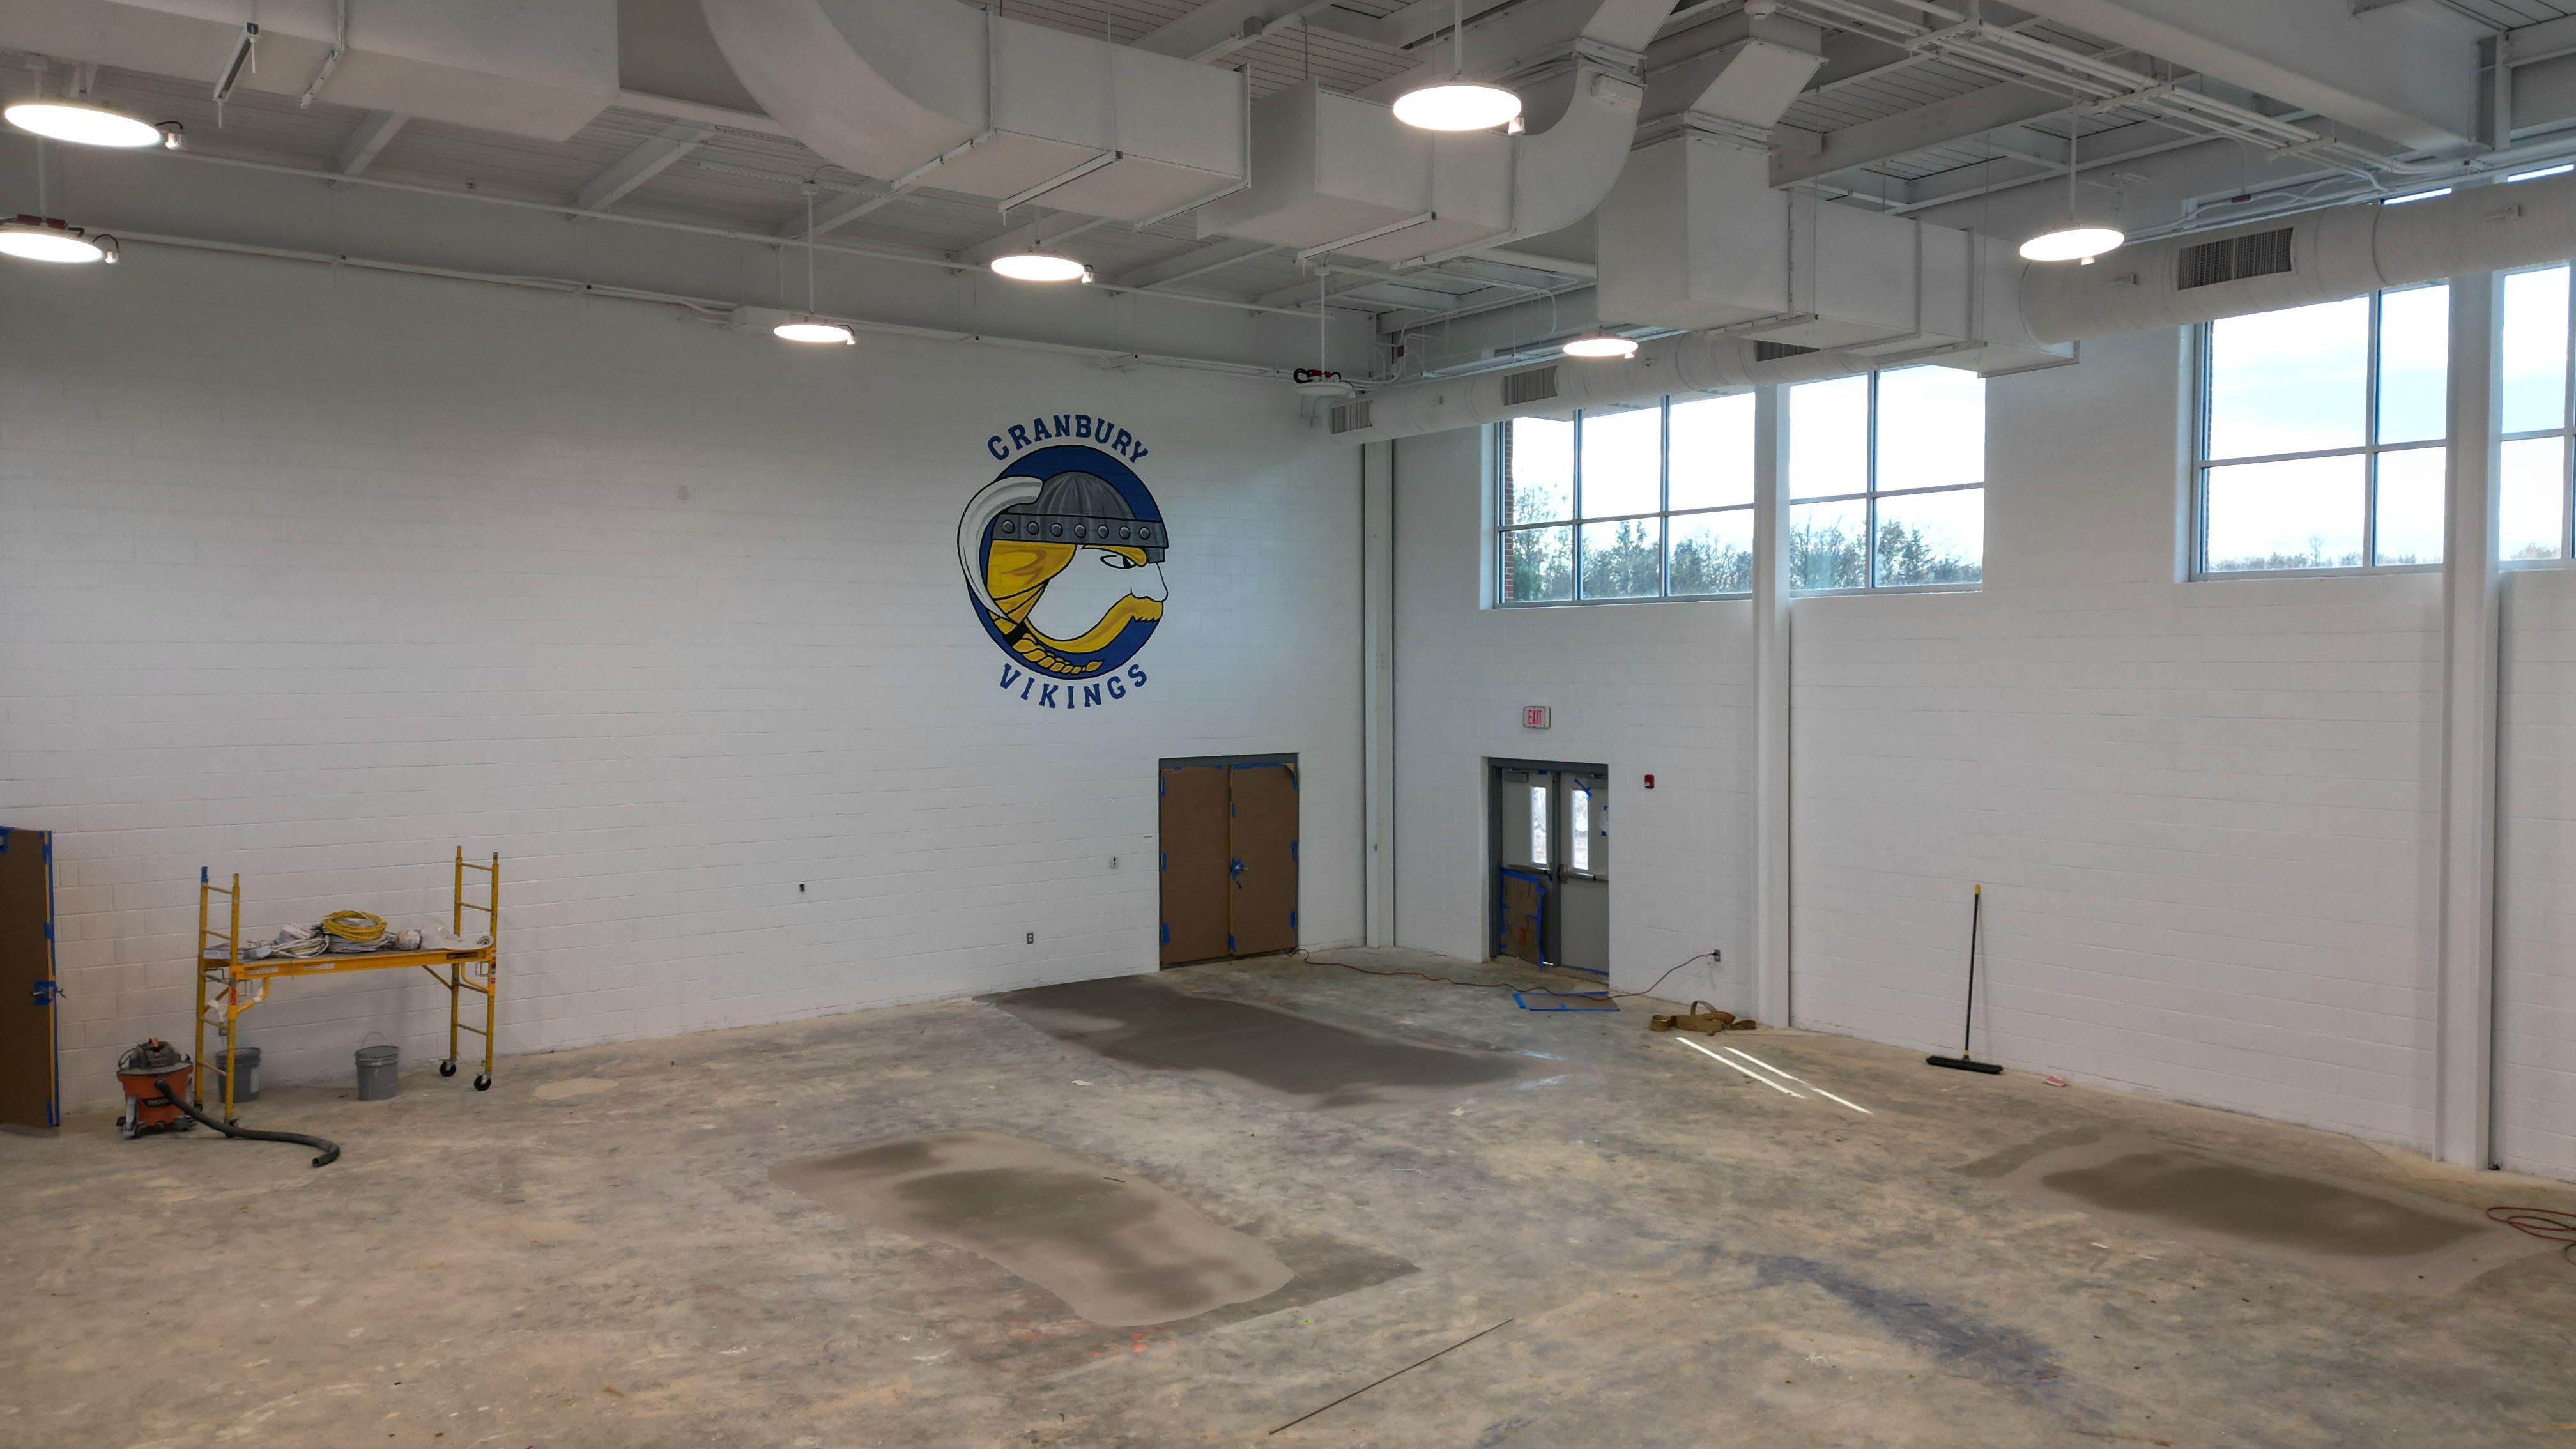 Auxiliary Gym - Inside Pic # 1